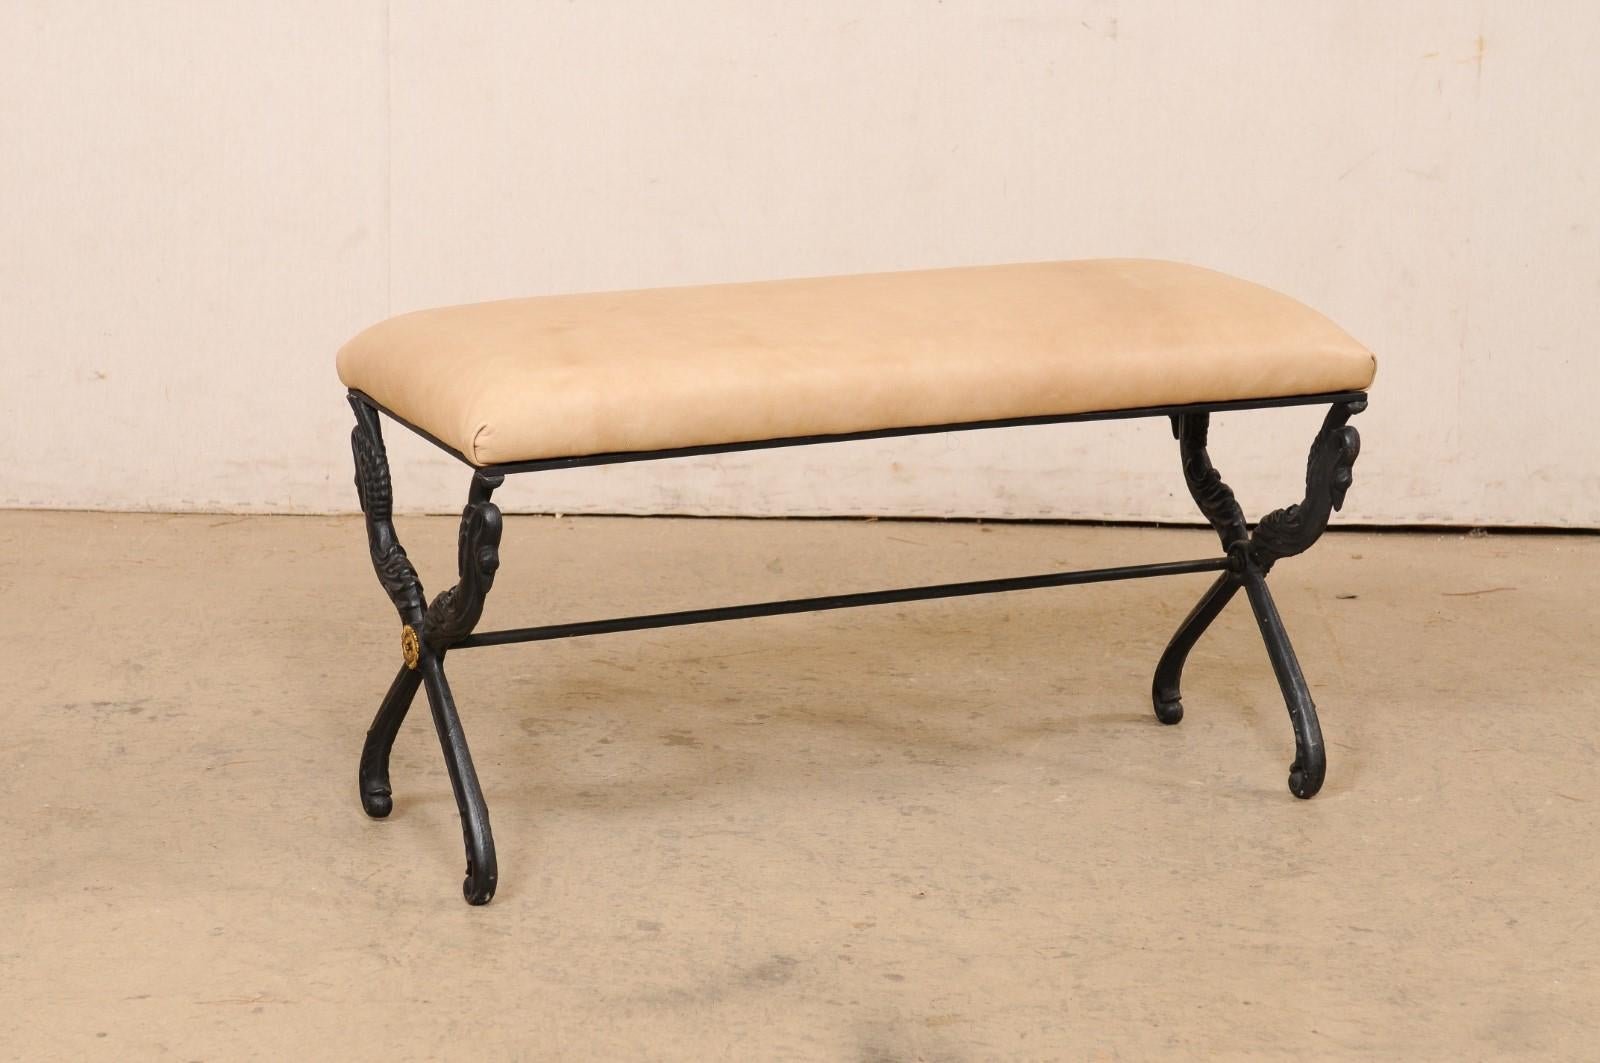 A French iron bench in swan motif with leather upholstered seat. This vintage bench from France has a rectangular-shaped seat which rests atop a black iron base that is risen by a pair of x-style legs at either side, and a slender stretcher bar